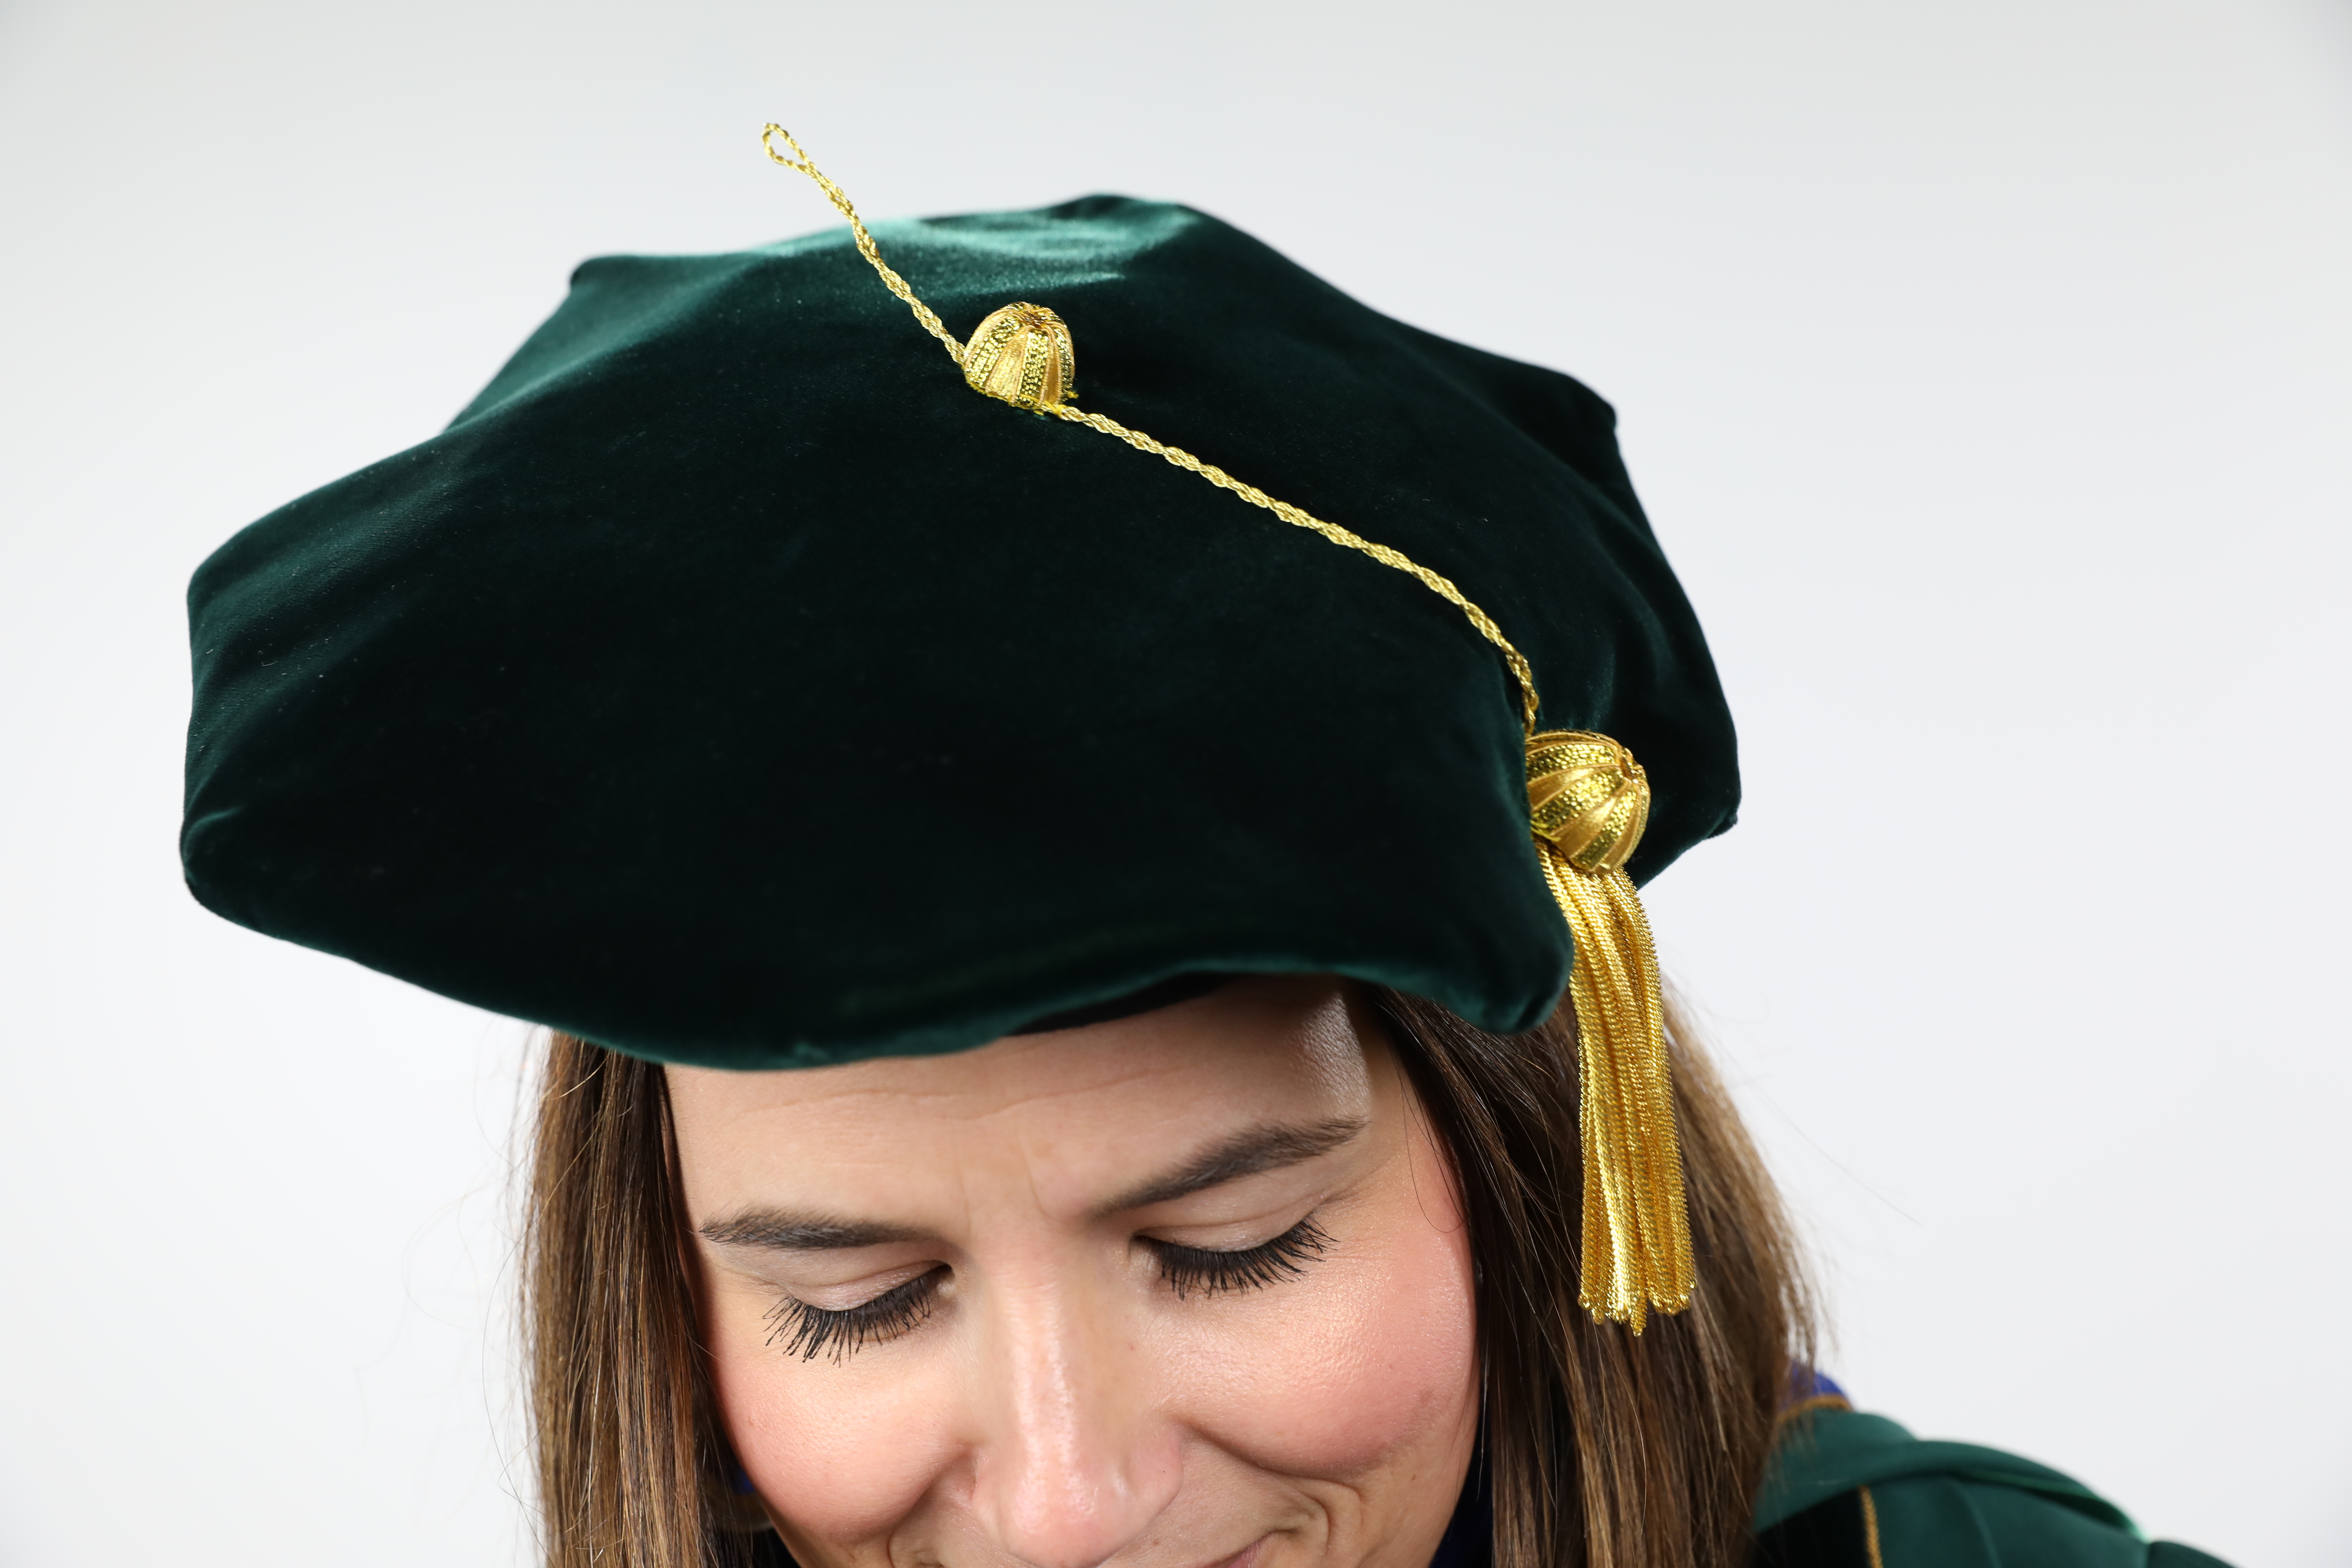 Detail view of cap for doctoral regalia